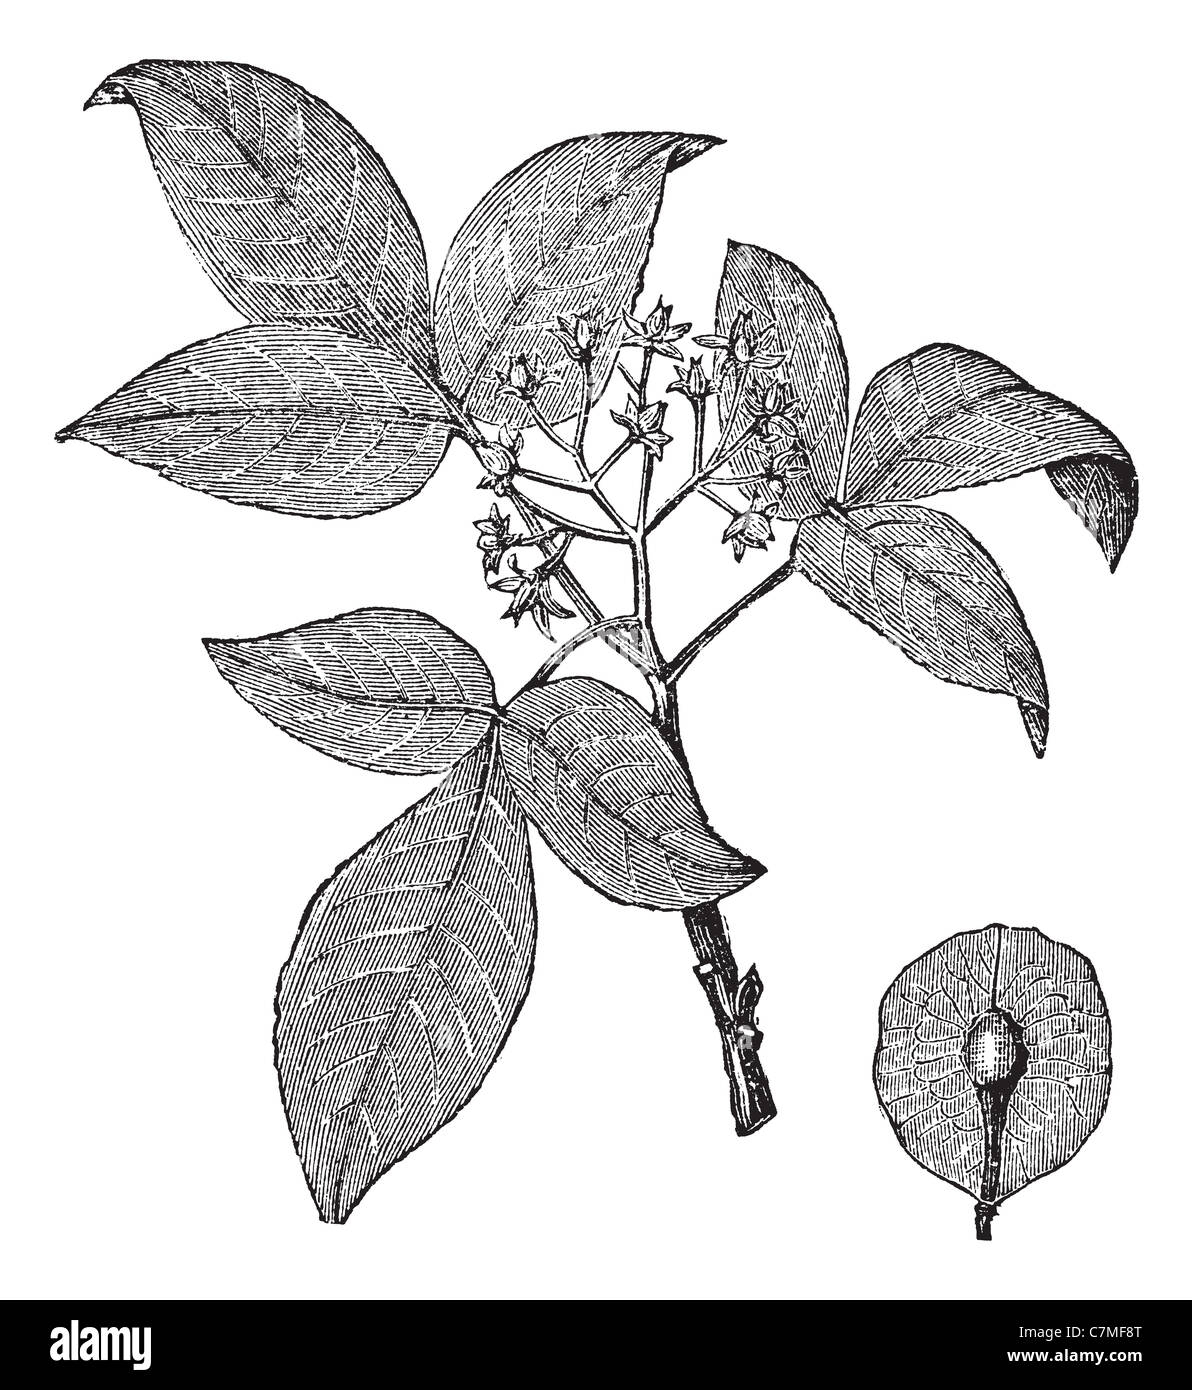 Hoptree or Ptelea trifoliata, vintage engraving. Old engraved illustration of Hoptree isolated on a white background. Stock Photo